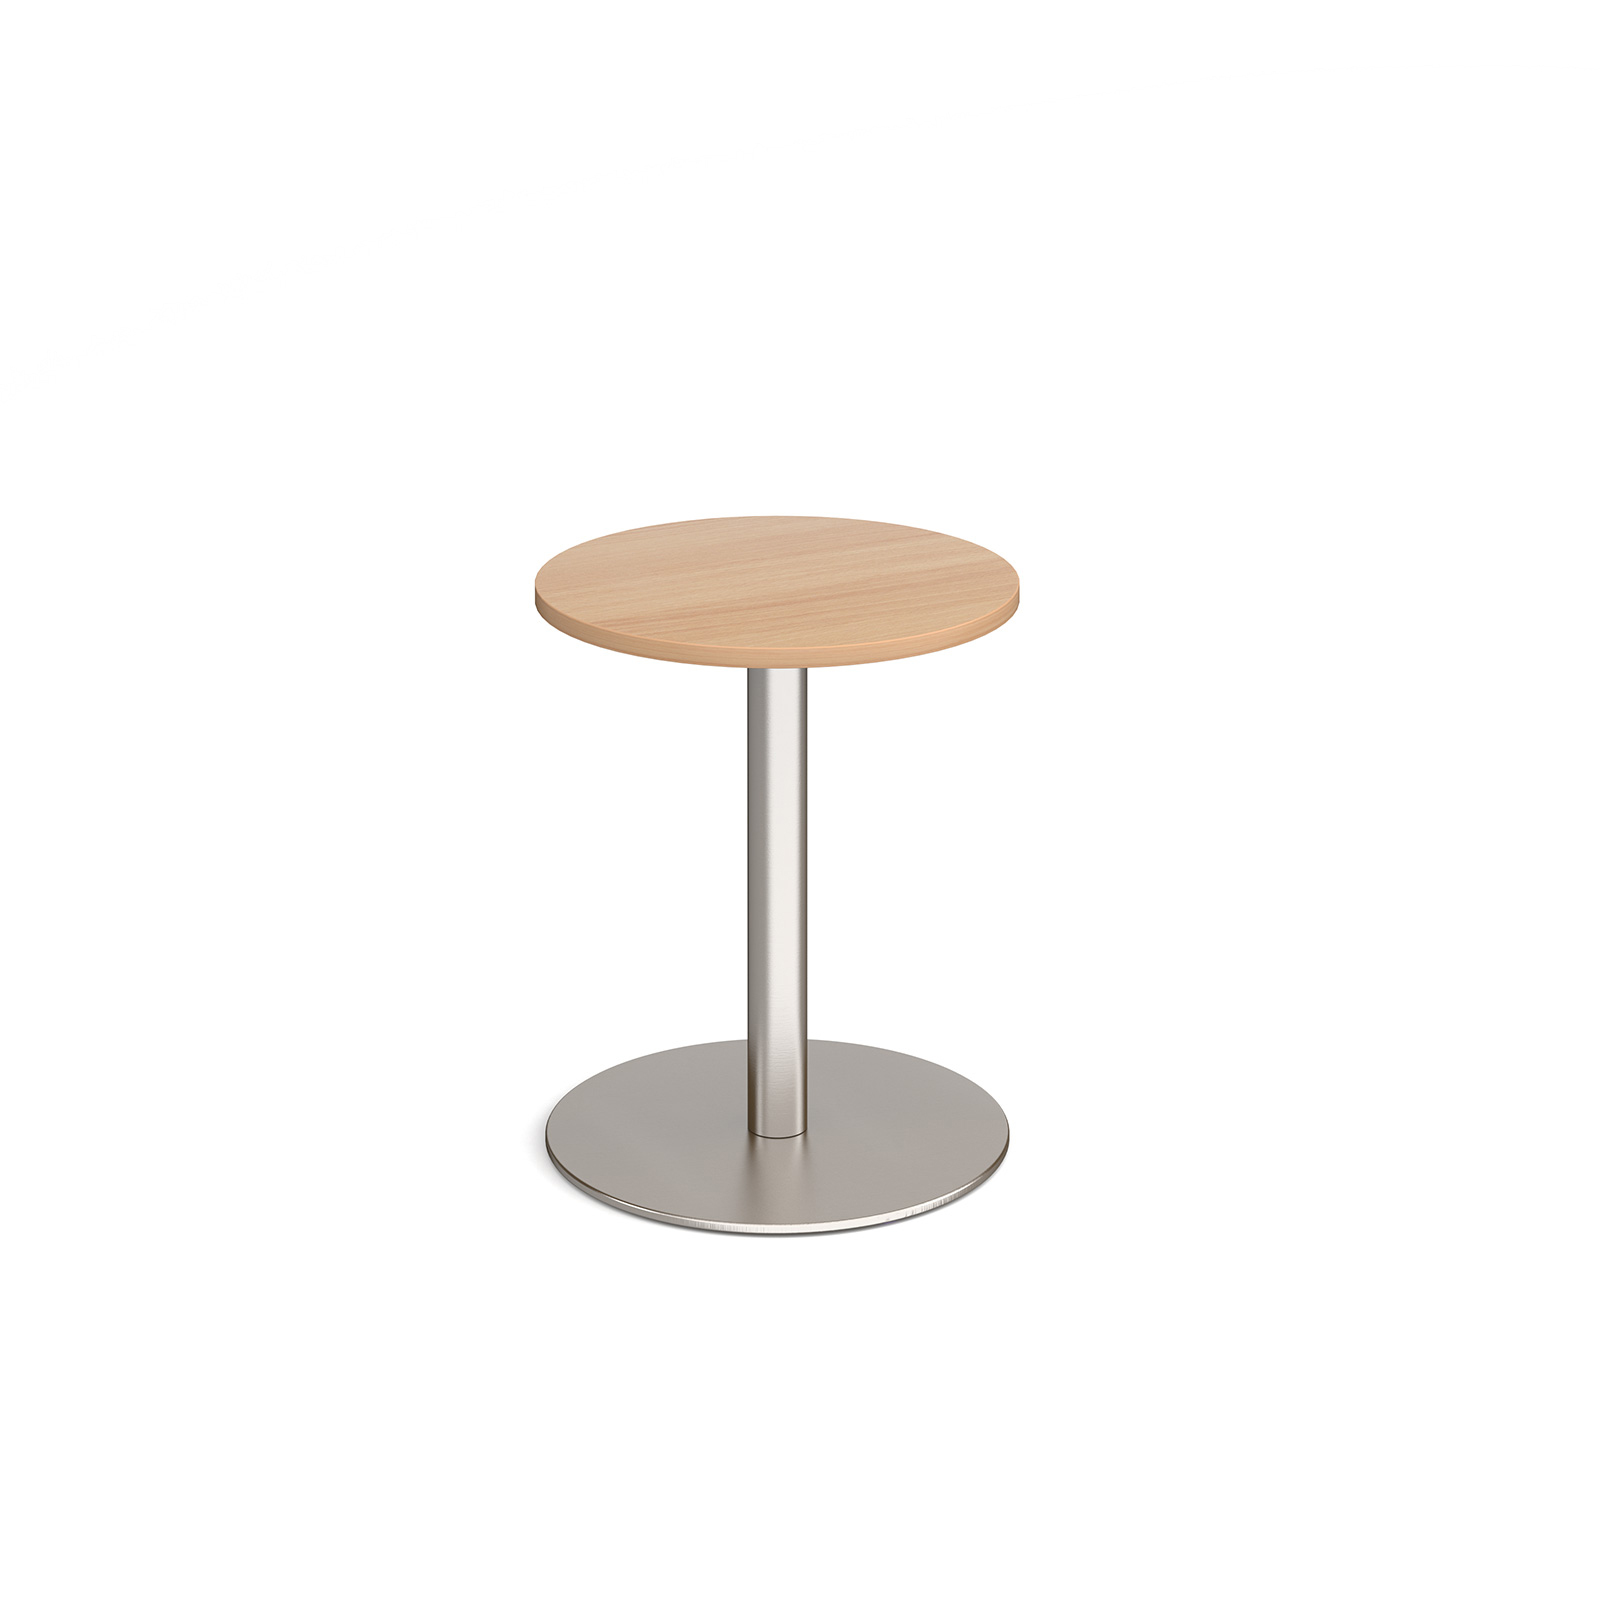 Monza circular dining table with flat round brushed steel base 600mm - beech